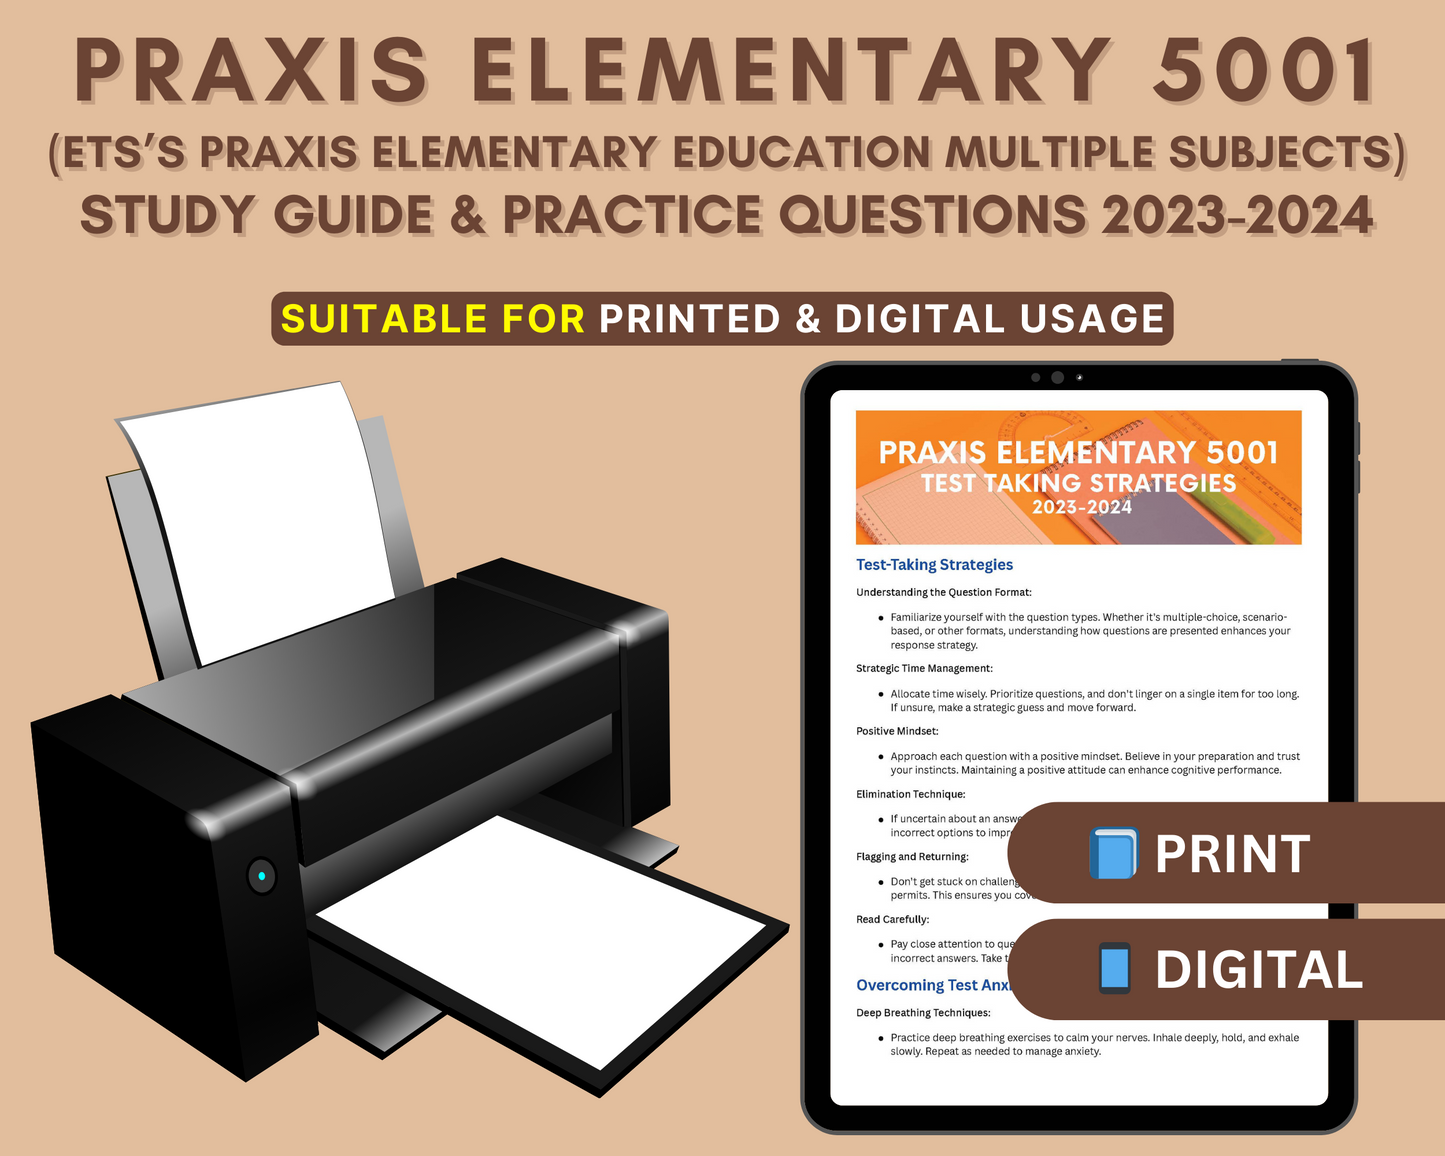 Praxis Elementary Education 5001 Study Guide 2023-2024: In-Depth Content Review, Practice Tests & Exam Strategies